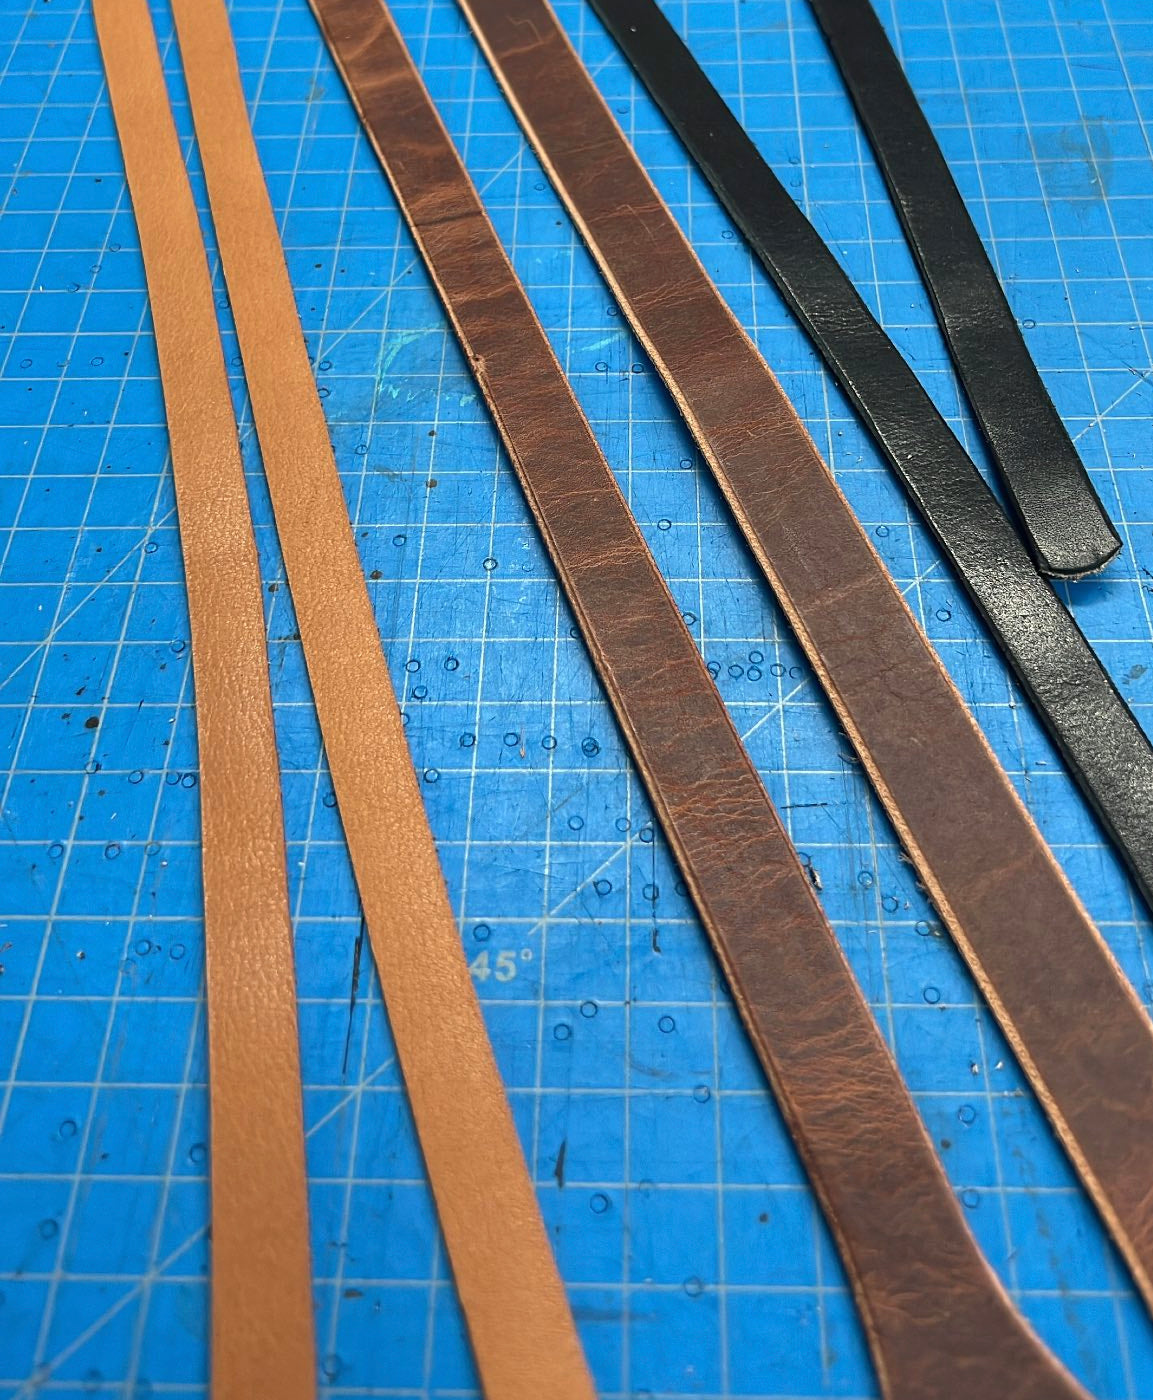 30” x 1/2” Leather Straps with rivets Qty 2 for bag making, sewing